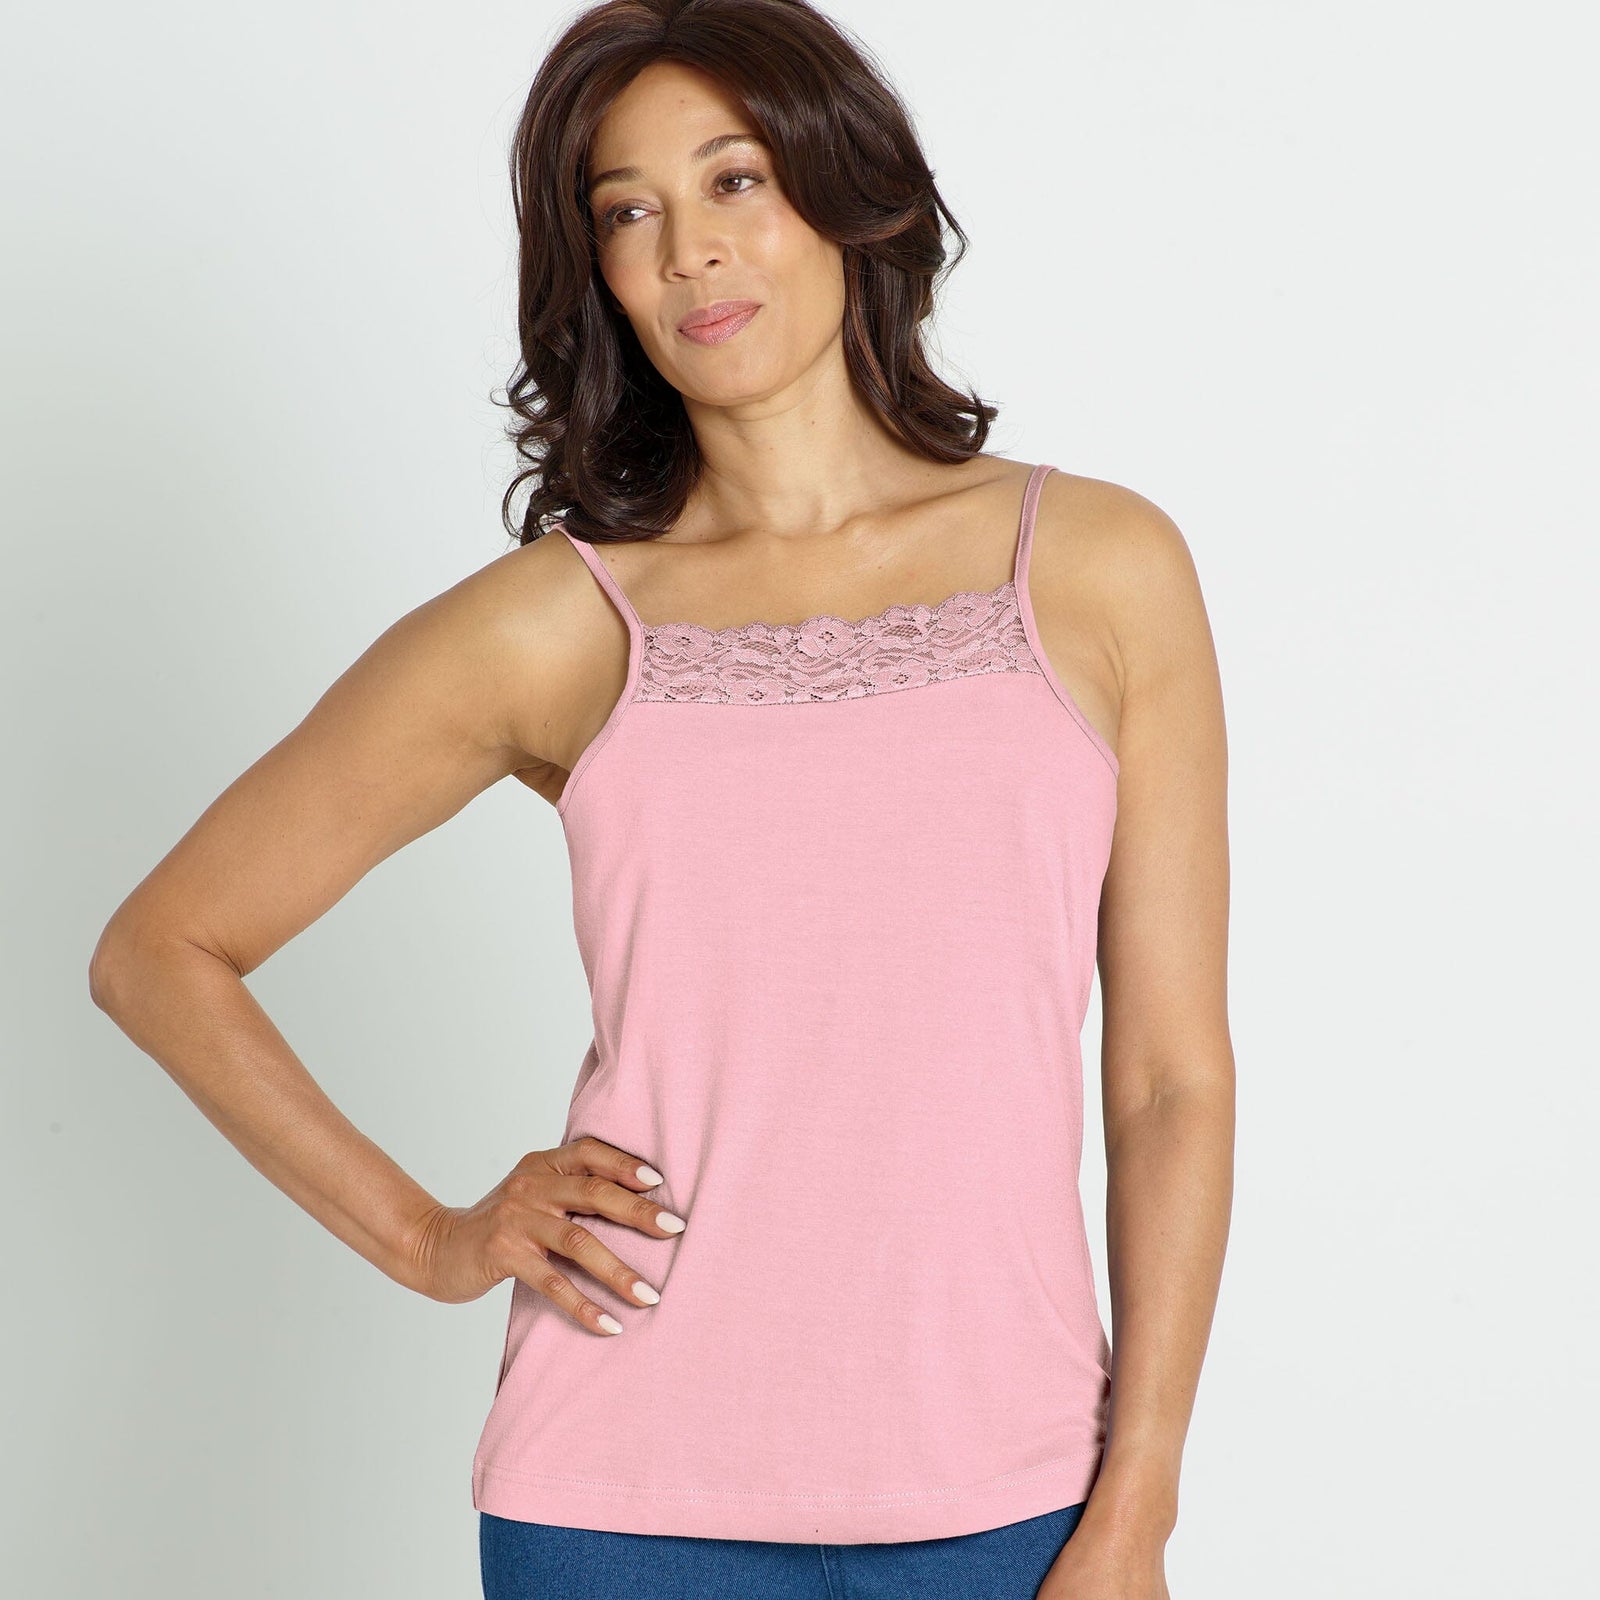 Inspired Comforts Mastectomy Camisole Tank Top with Hidden Drain Pockets,  Soft Bra Cup Forms & Adjustable Straps - Black / S